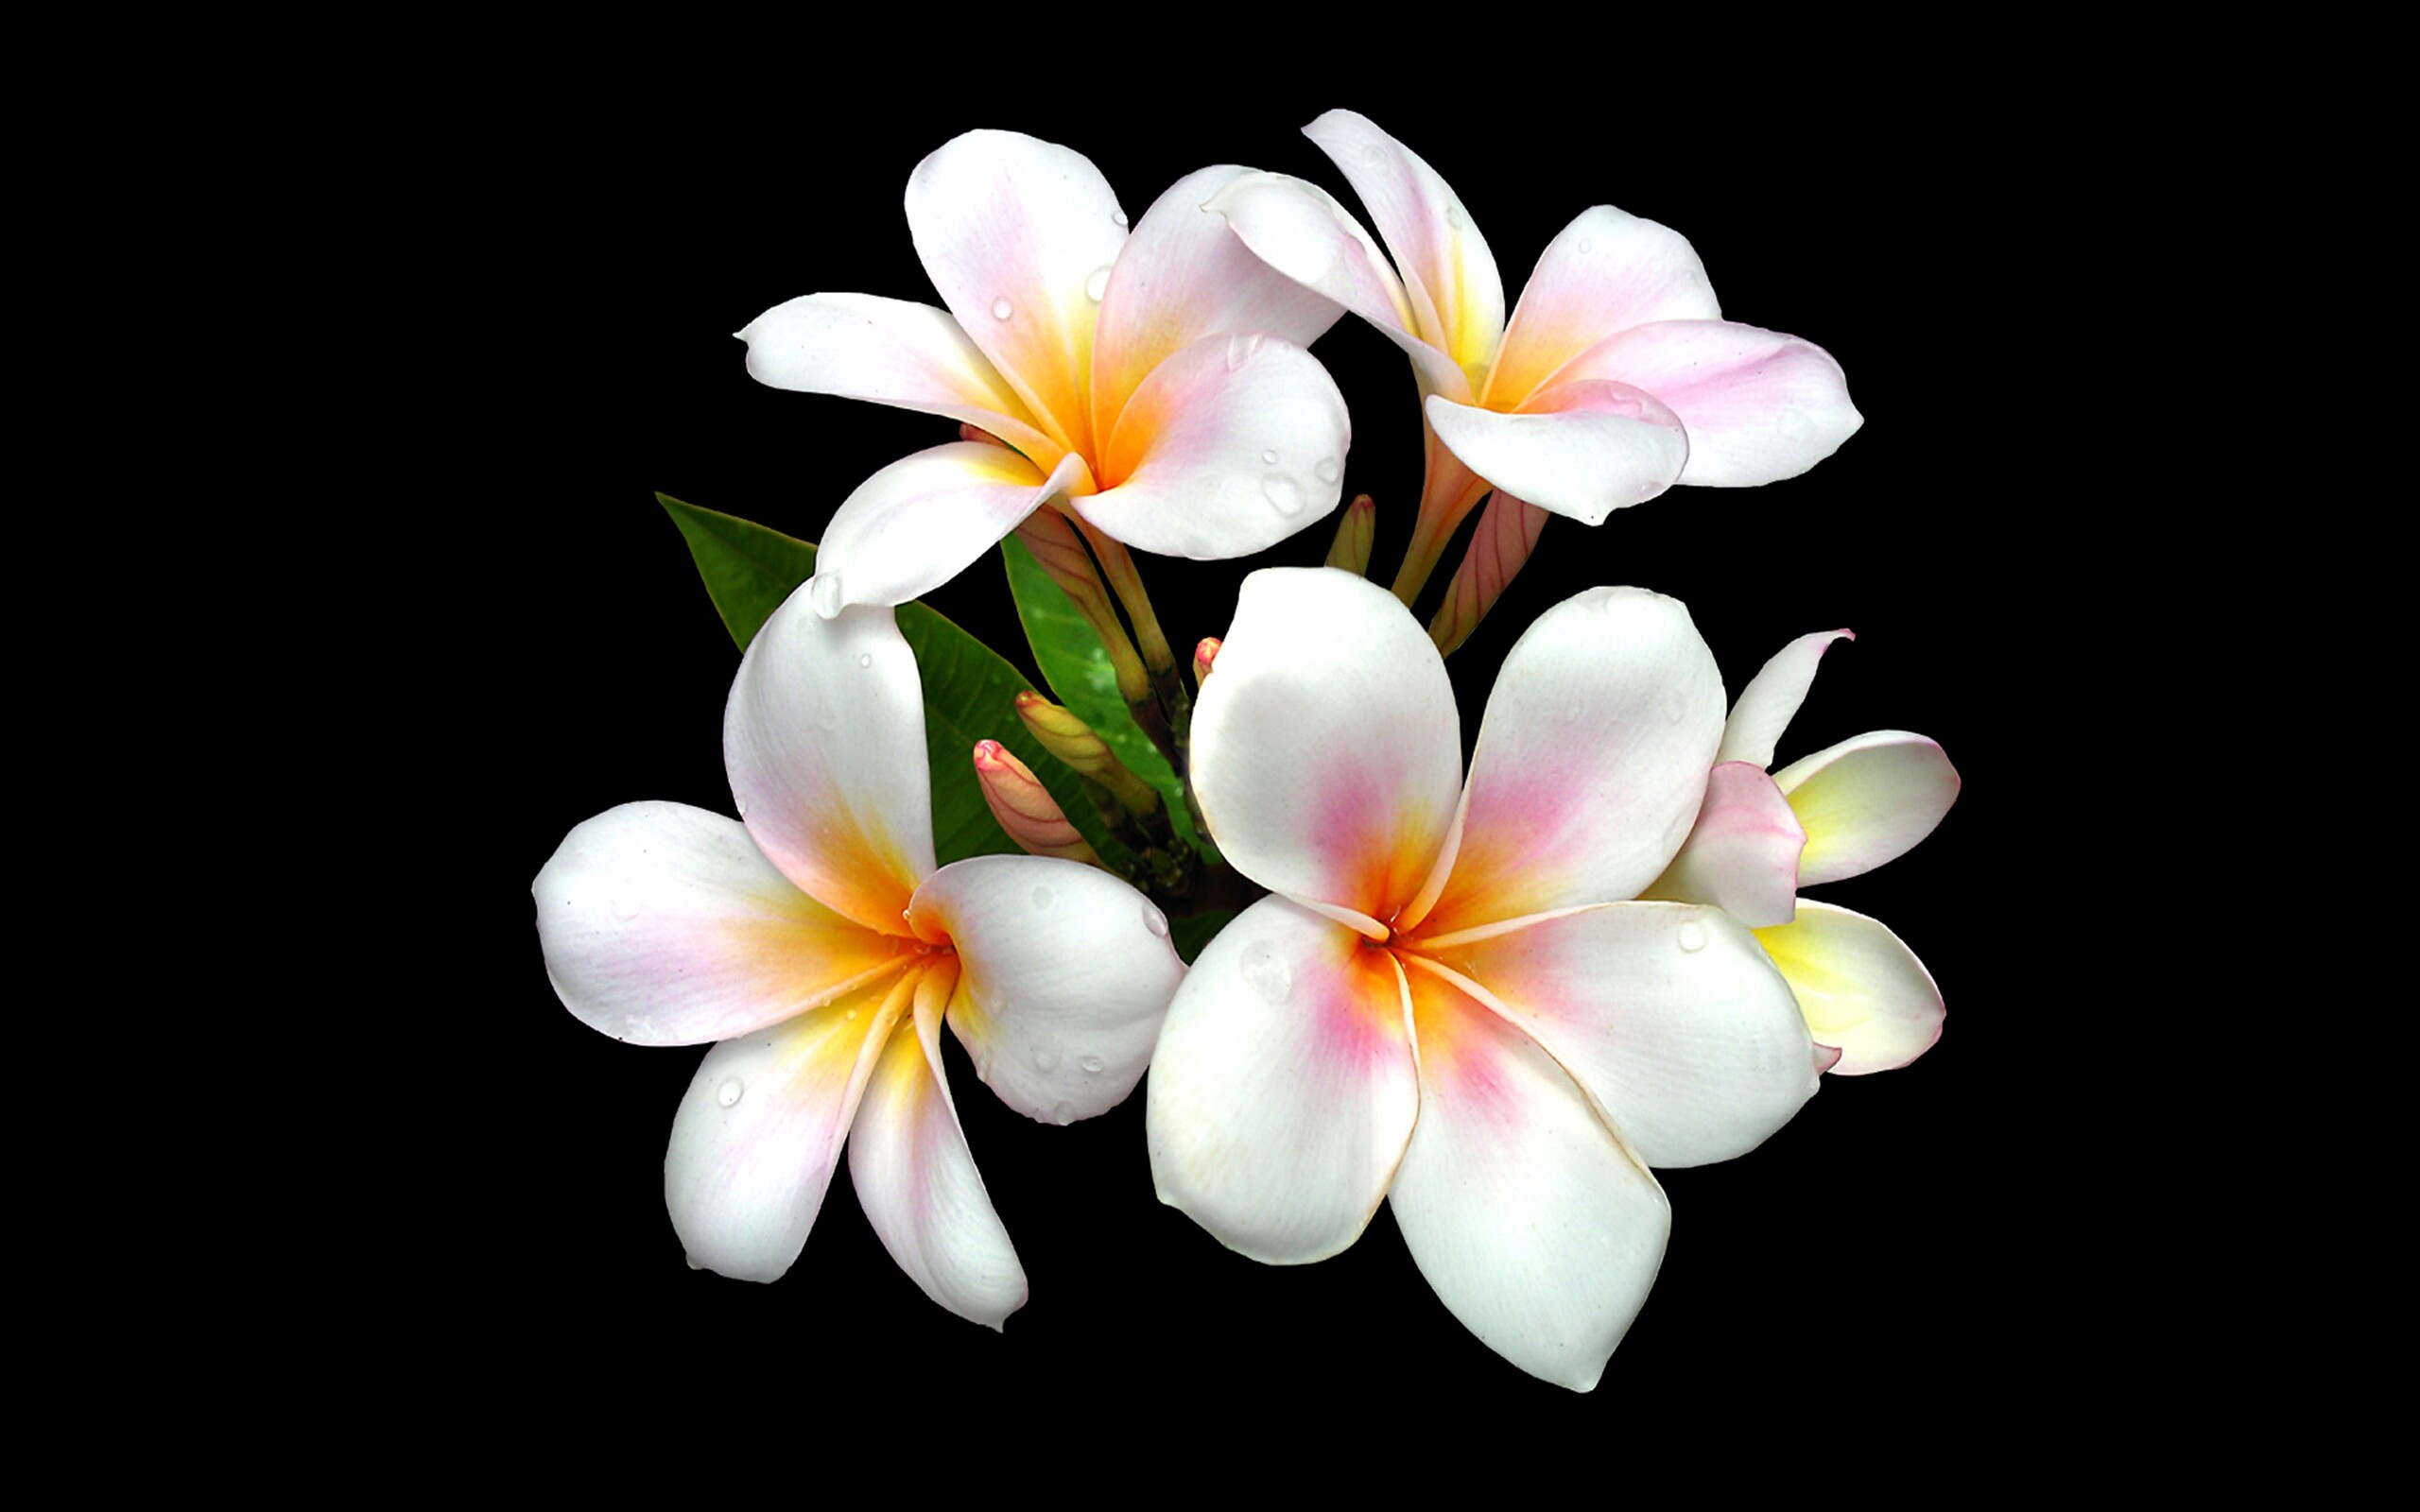 Frangipani Flower: The genus Plumeria includes about a dozen accepted species, and one or two dozen are open to review, with over 100 regarded as synonyms. 2560x1600 HD Background.